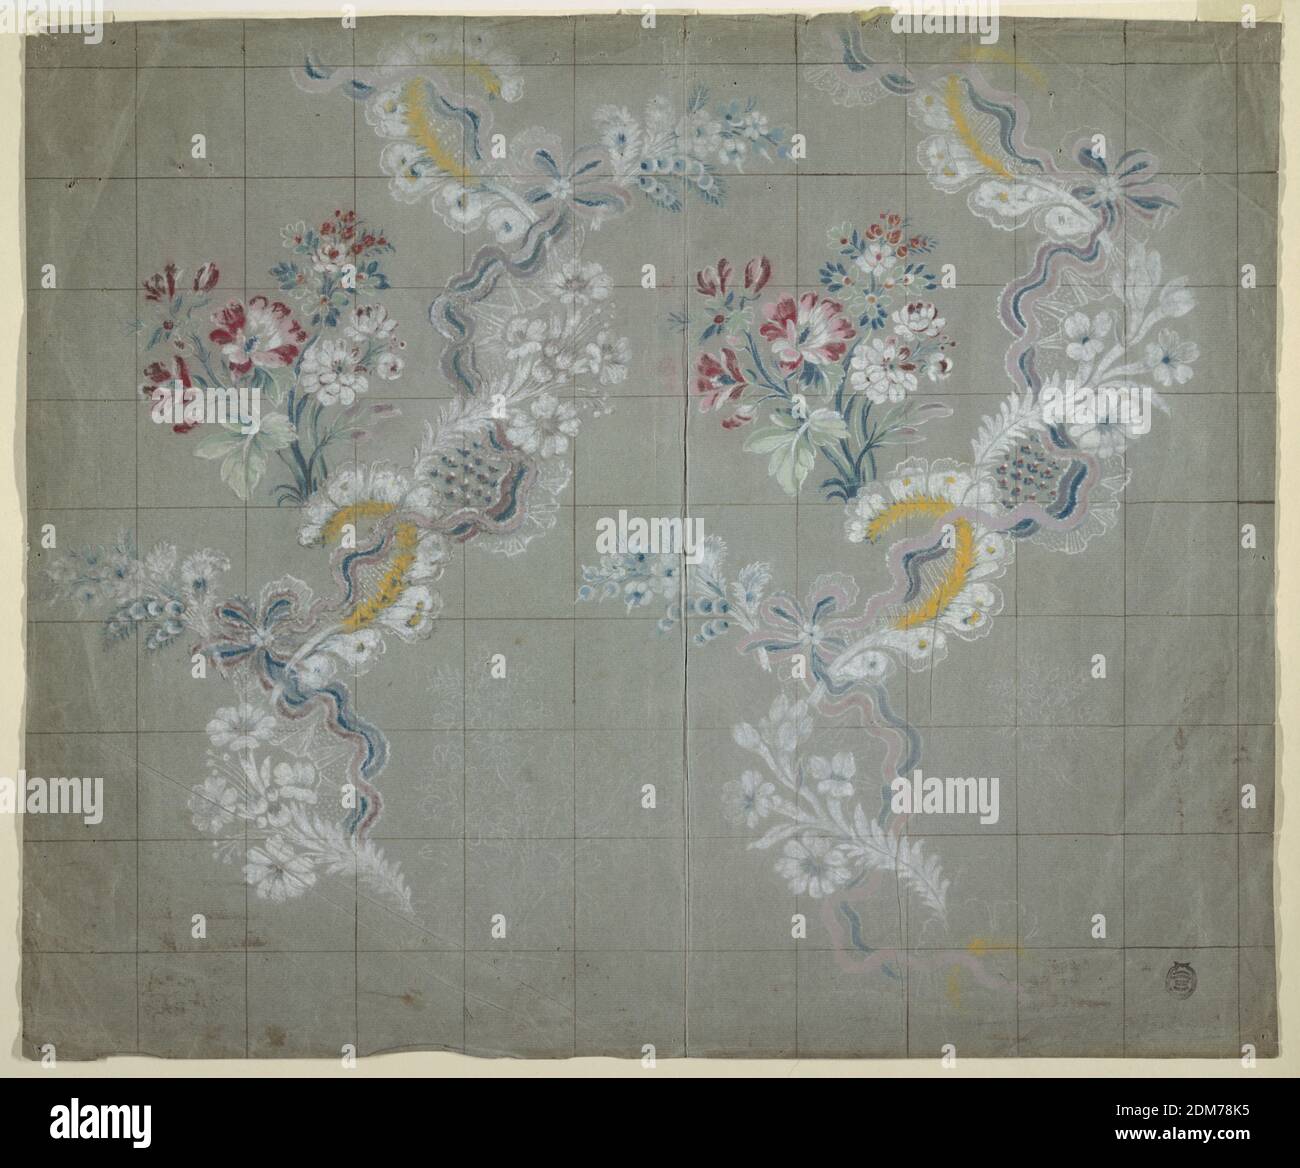 Design for a Silk Brocade, Pastel, pen and brown ink squaring on bluish grey laid paper, Horizontal composition illustrating glower sprays that spring from vertically rising and waved lace bands, to which flower boughs are fastened. One entire repeat is shown with the majority of another at right., France, ca. 1750, textile designs, Drawing Stock Photo